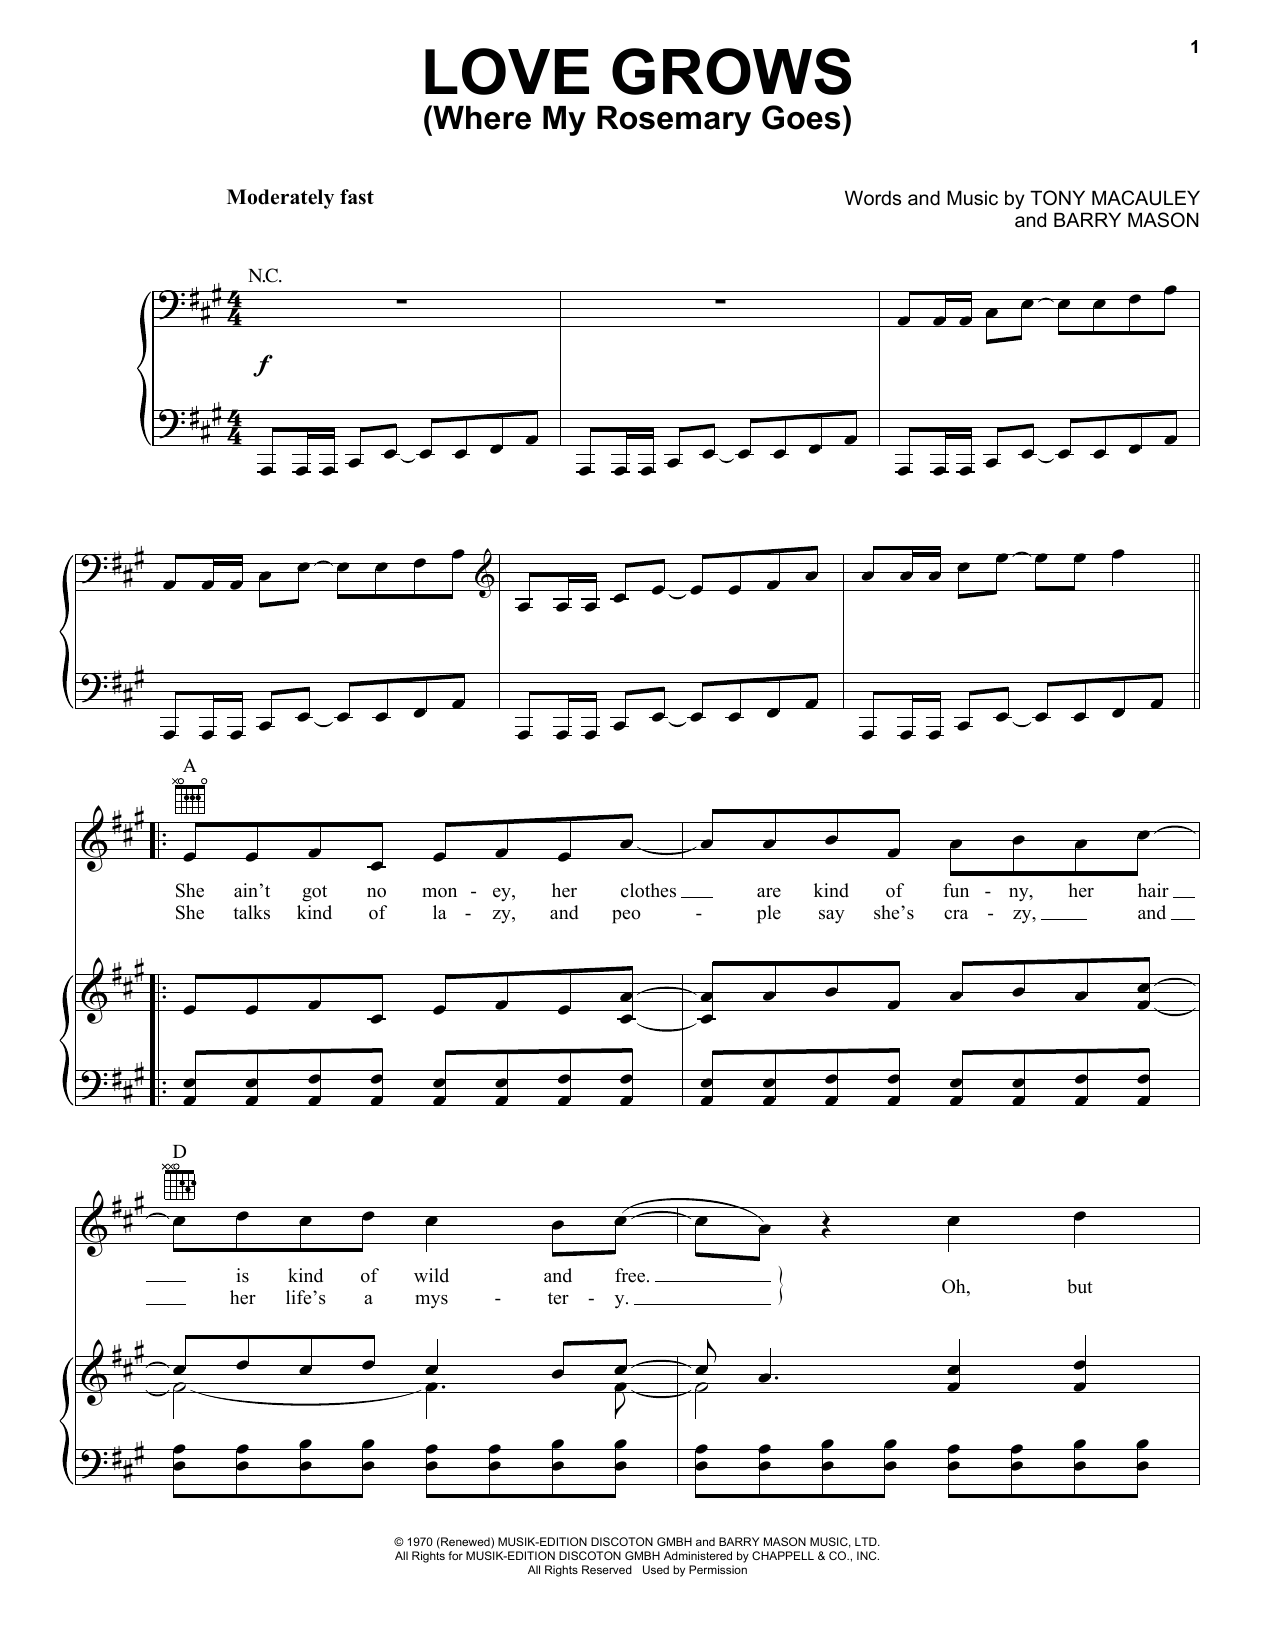 Download Edison Lighthouse Love Grows (Where My Rosemary Goes) Sheet Music